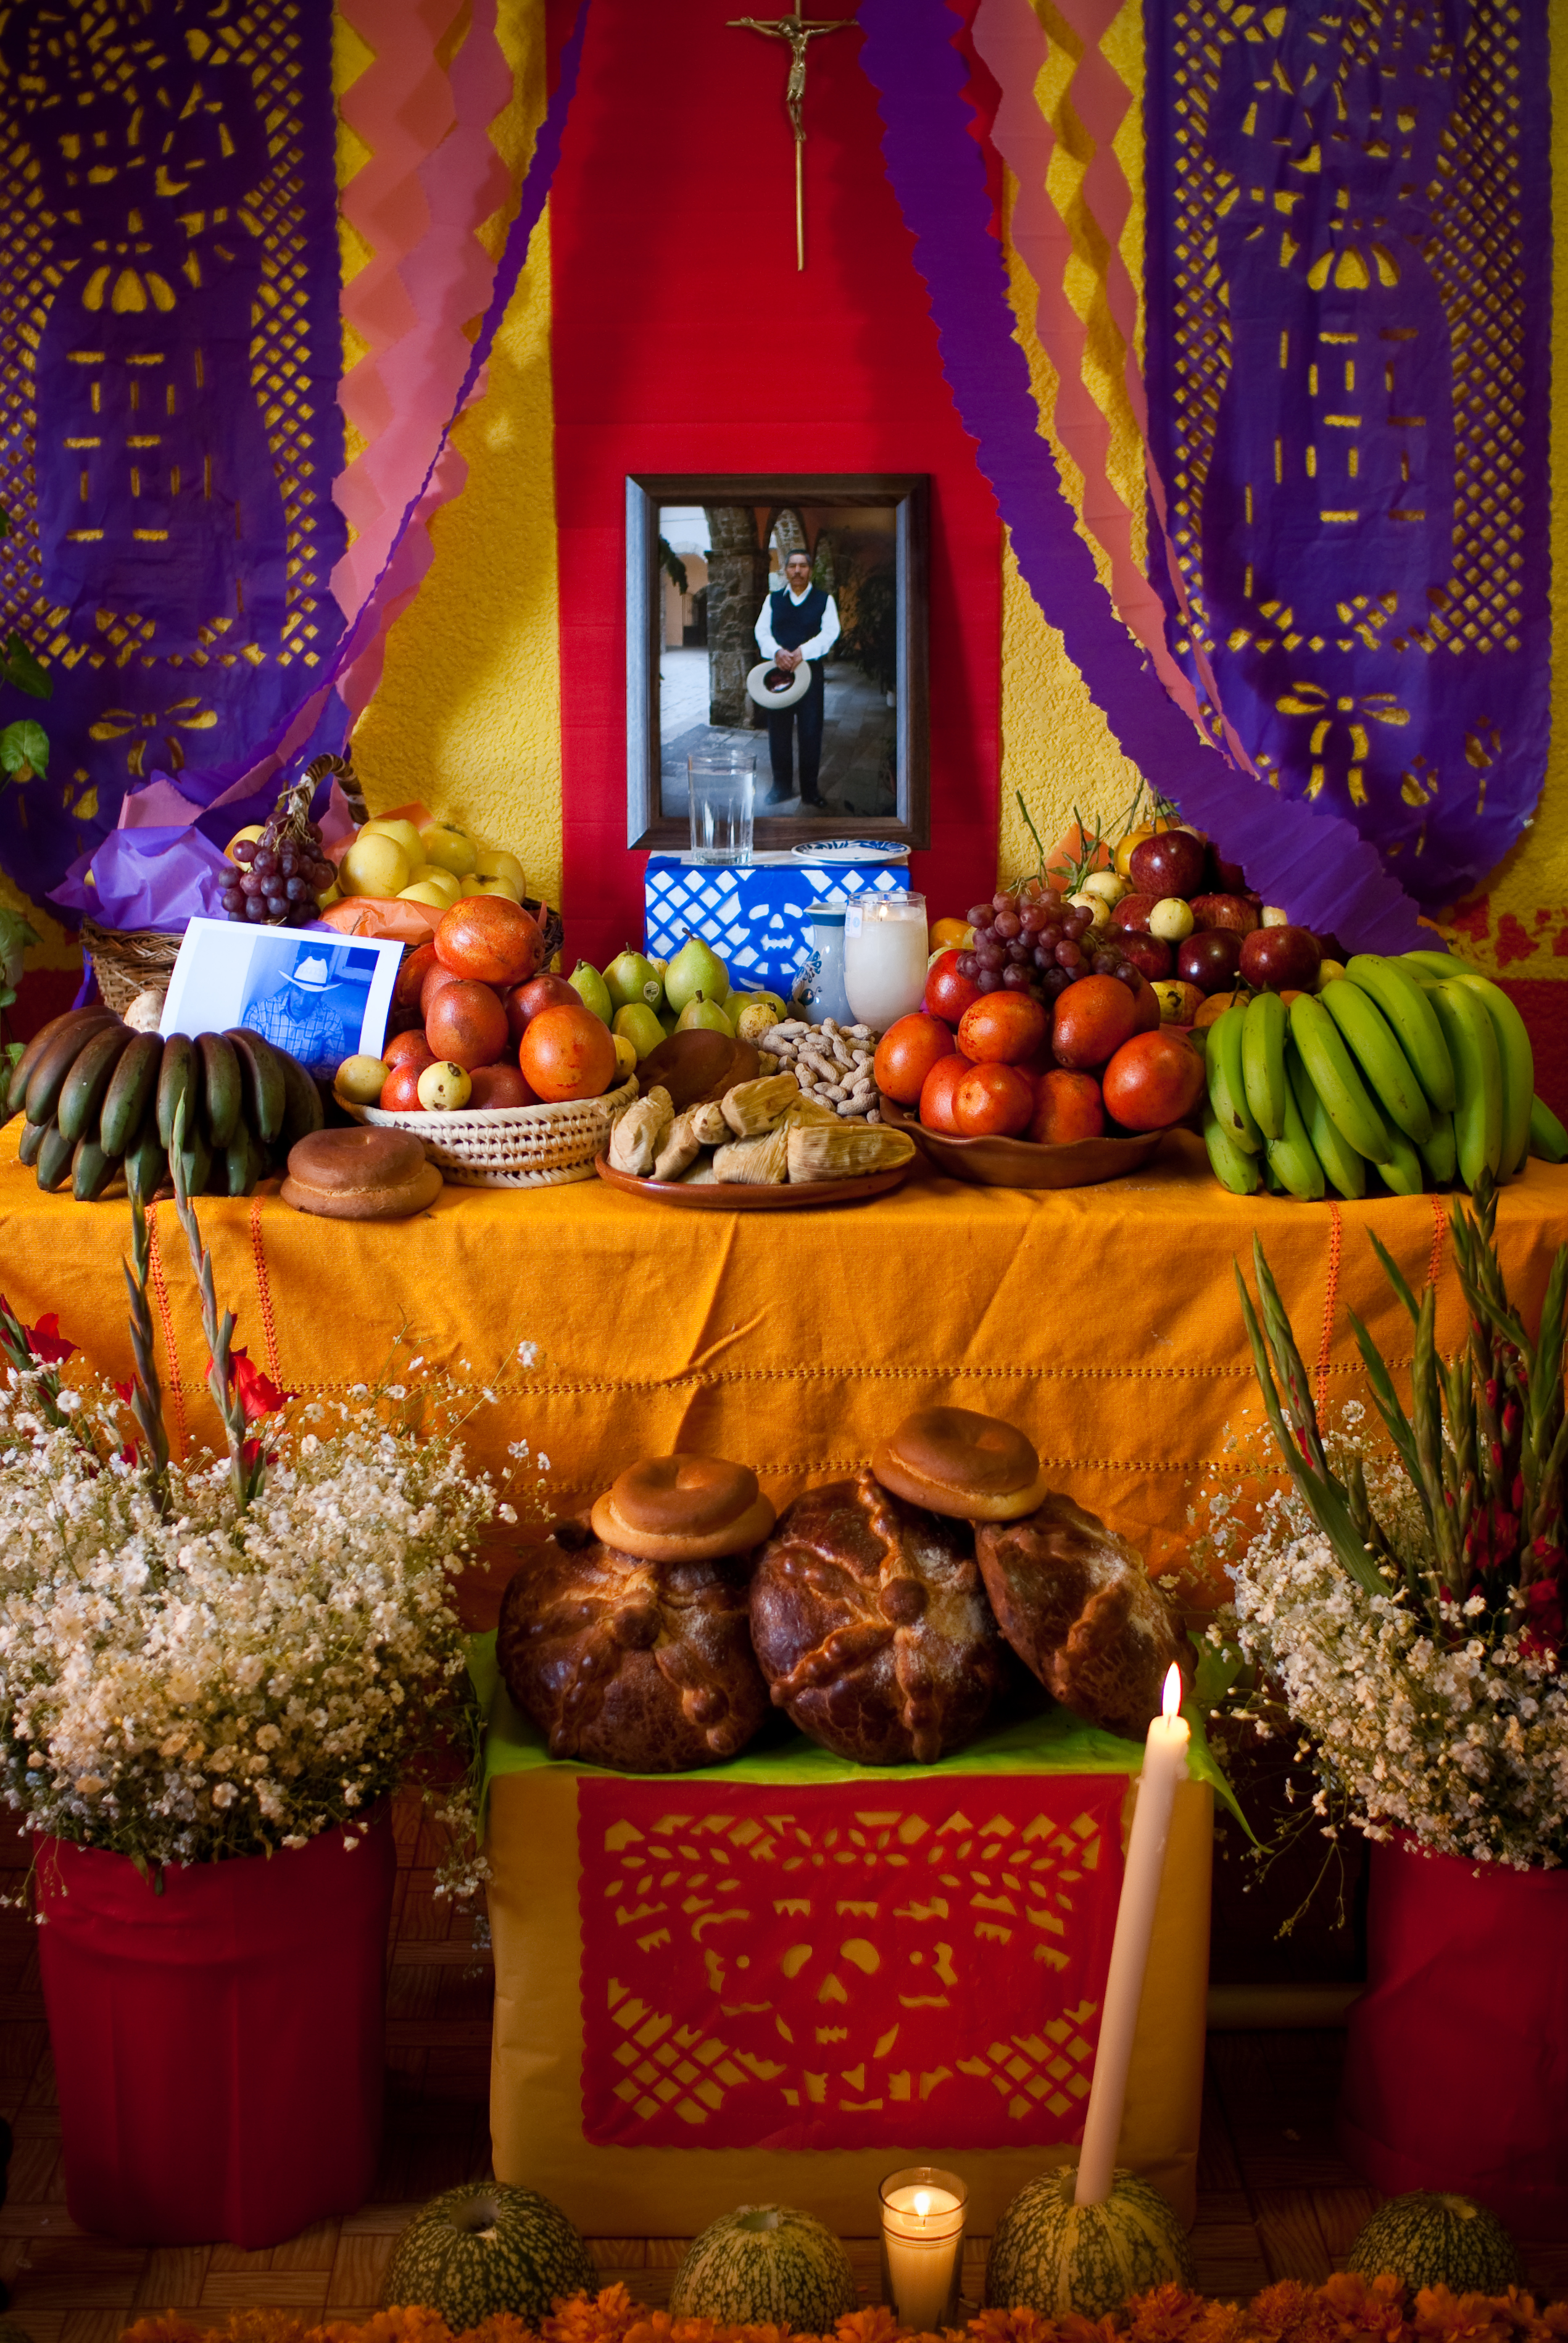 Table covered with an orange tablecloth and various foods. There is also a photo of an older man in traditional Mexican dress and purple paper cuttings hung from the ceiling.